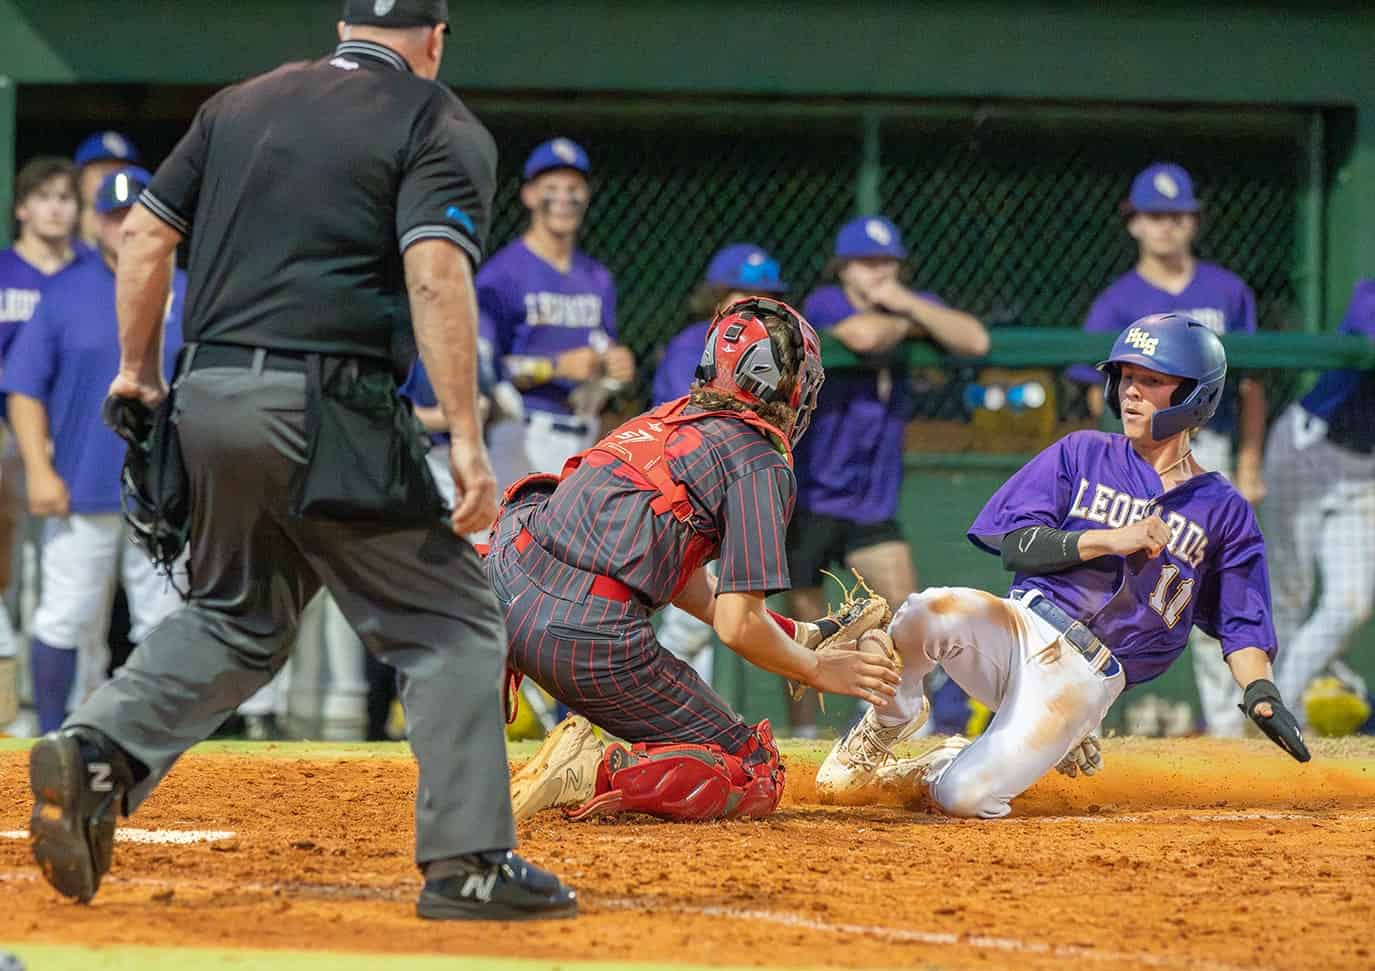 Hernando High’s Braden Harmon was able to score when the Hudson Cobra catcher, Baylor Lloyd, lost possession of the ball during this play at the plate Wednesday during the 4A District 6 semifinal in Brooksville. [Photo by Joseph DiCristofalo]